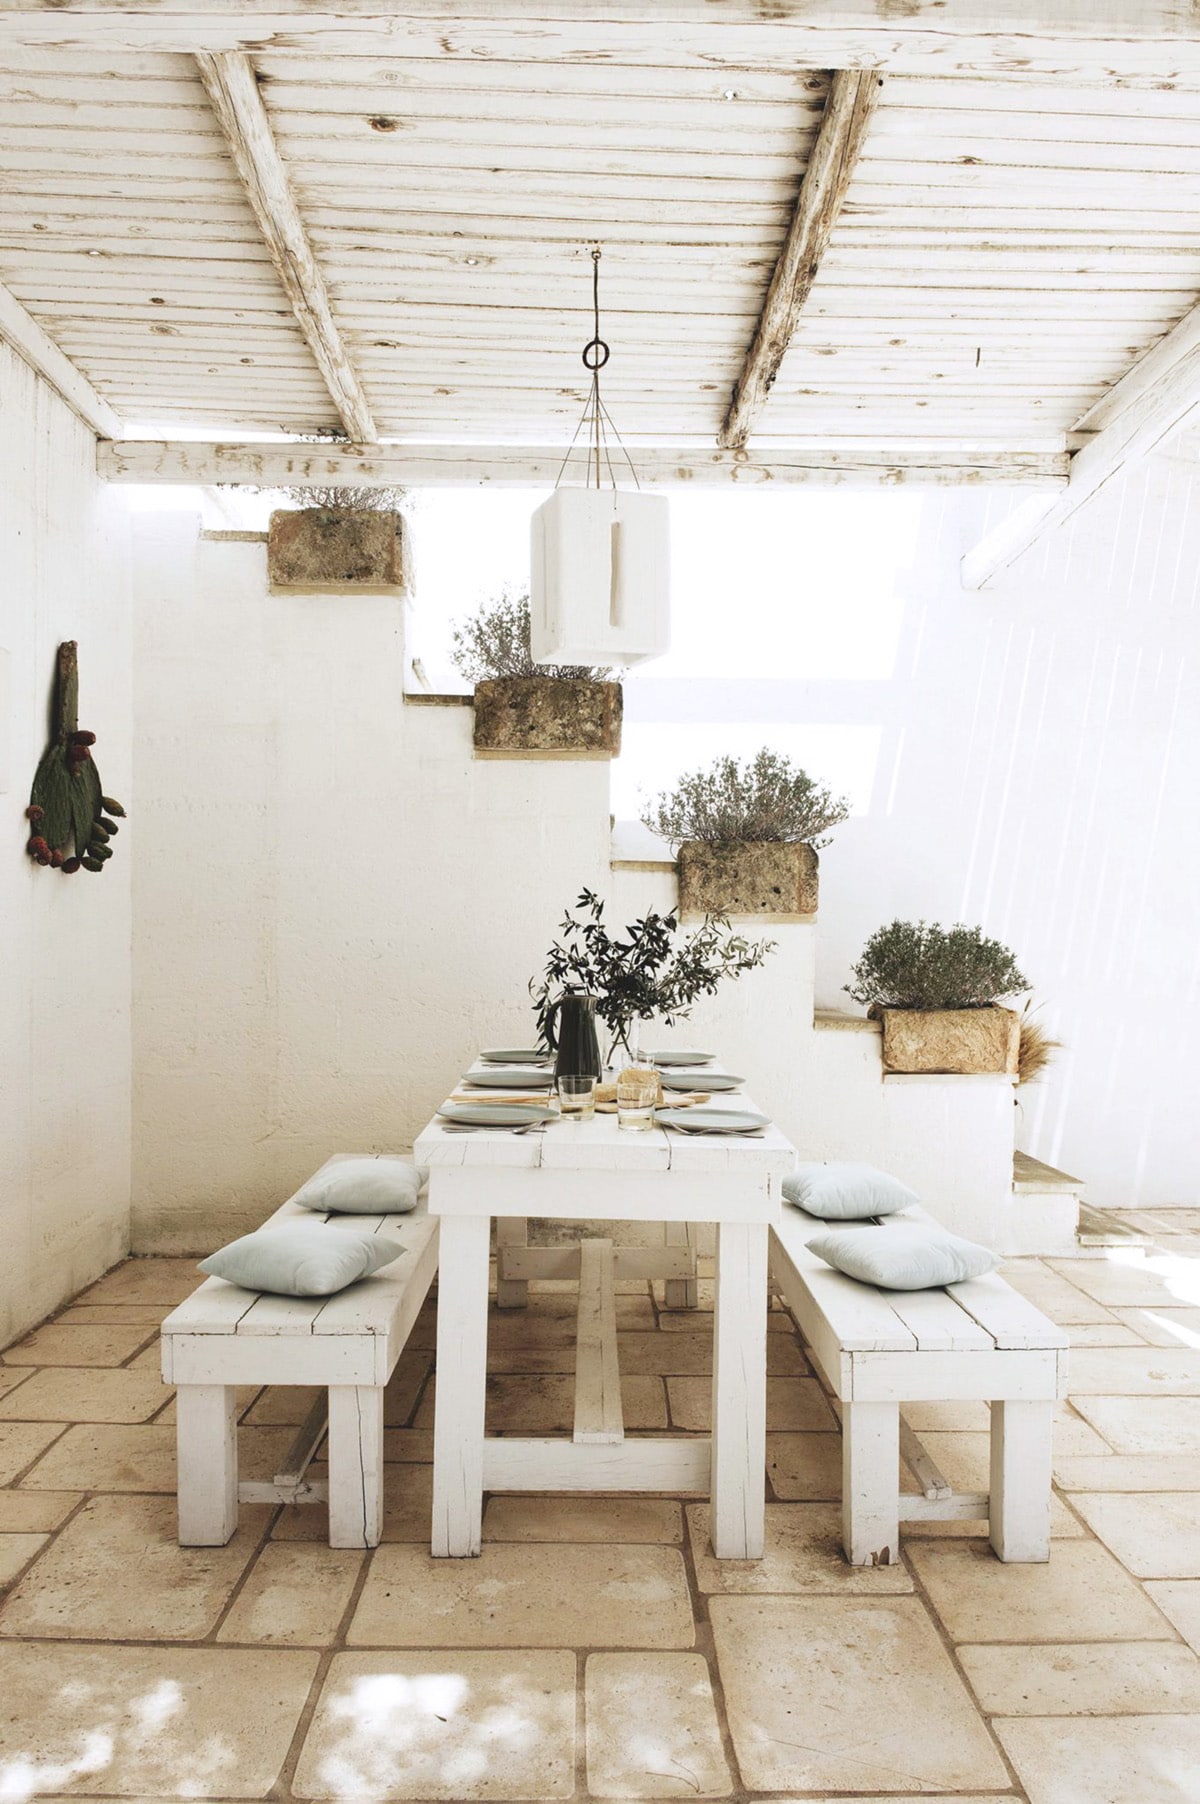 outdoor dining in the shade in puglia vacation home | coco kelley